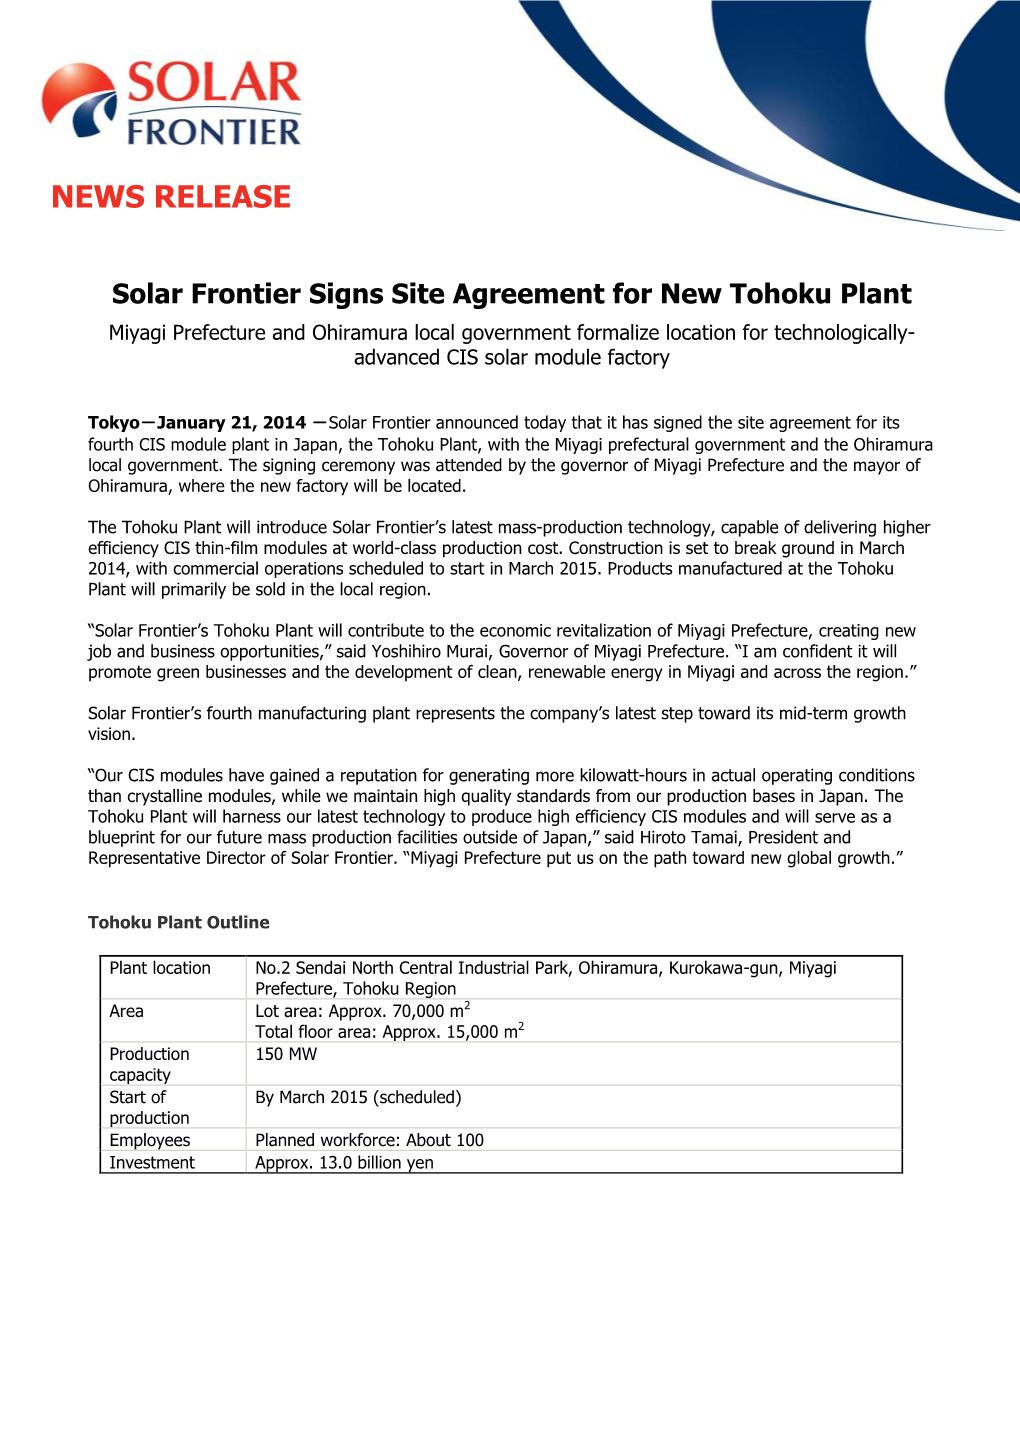 Solar Frontier Signs Site Agreement for New Tohoku Plant